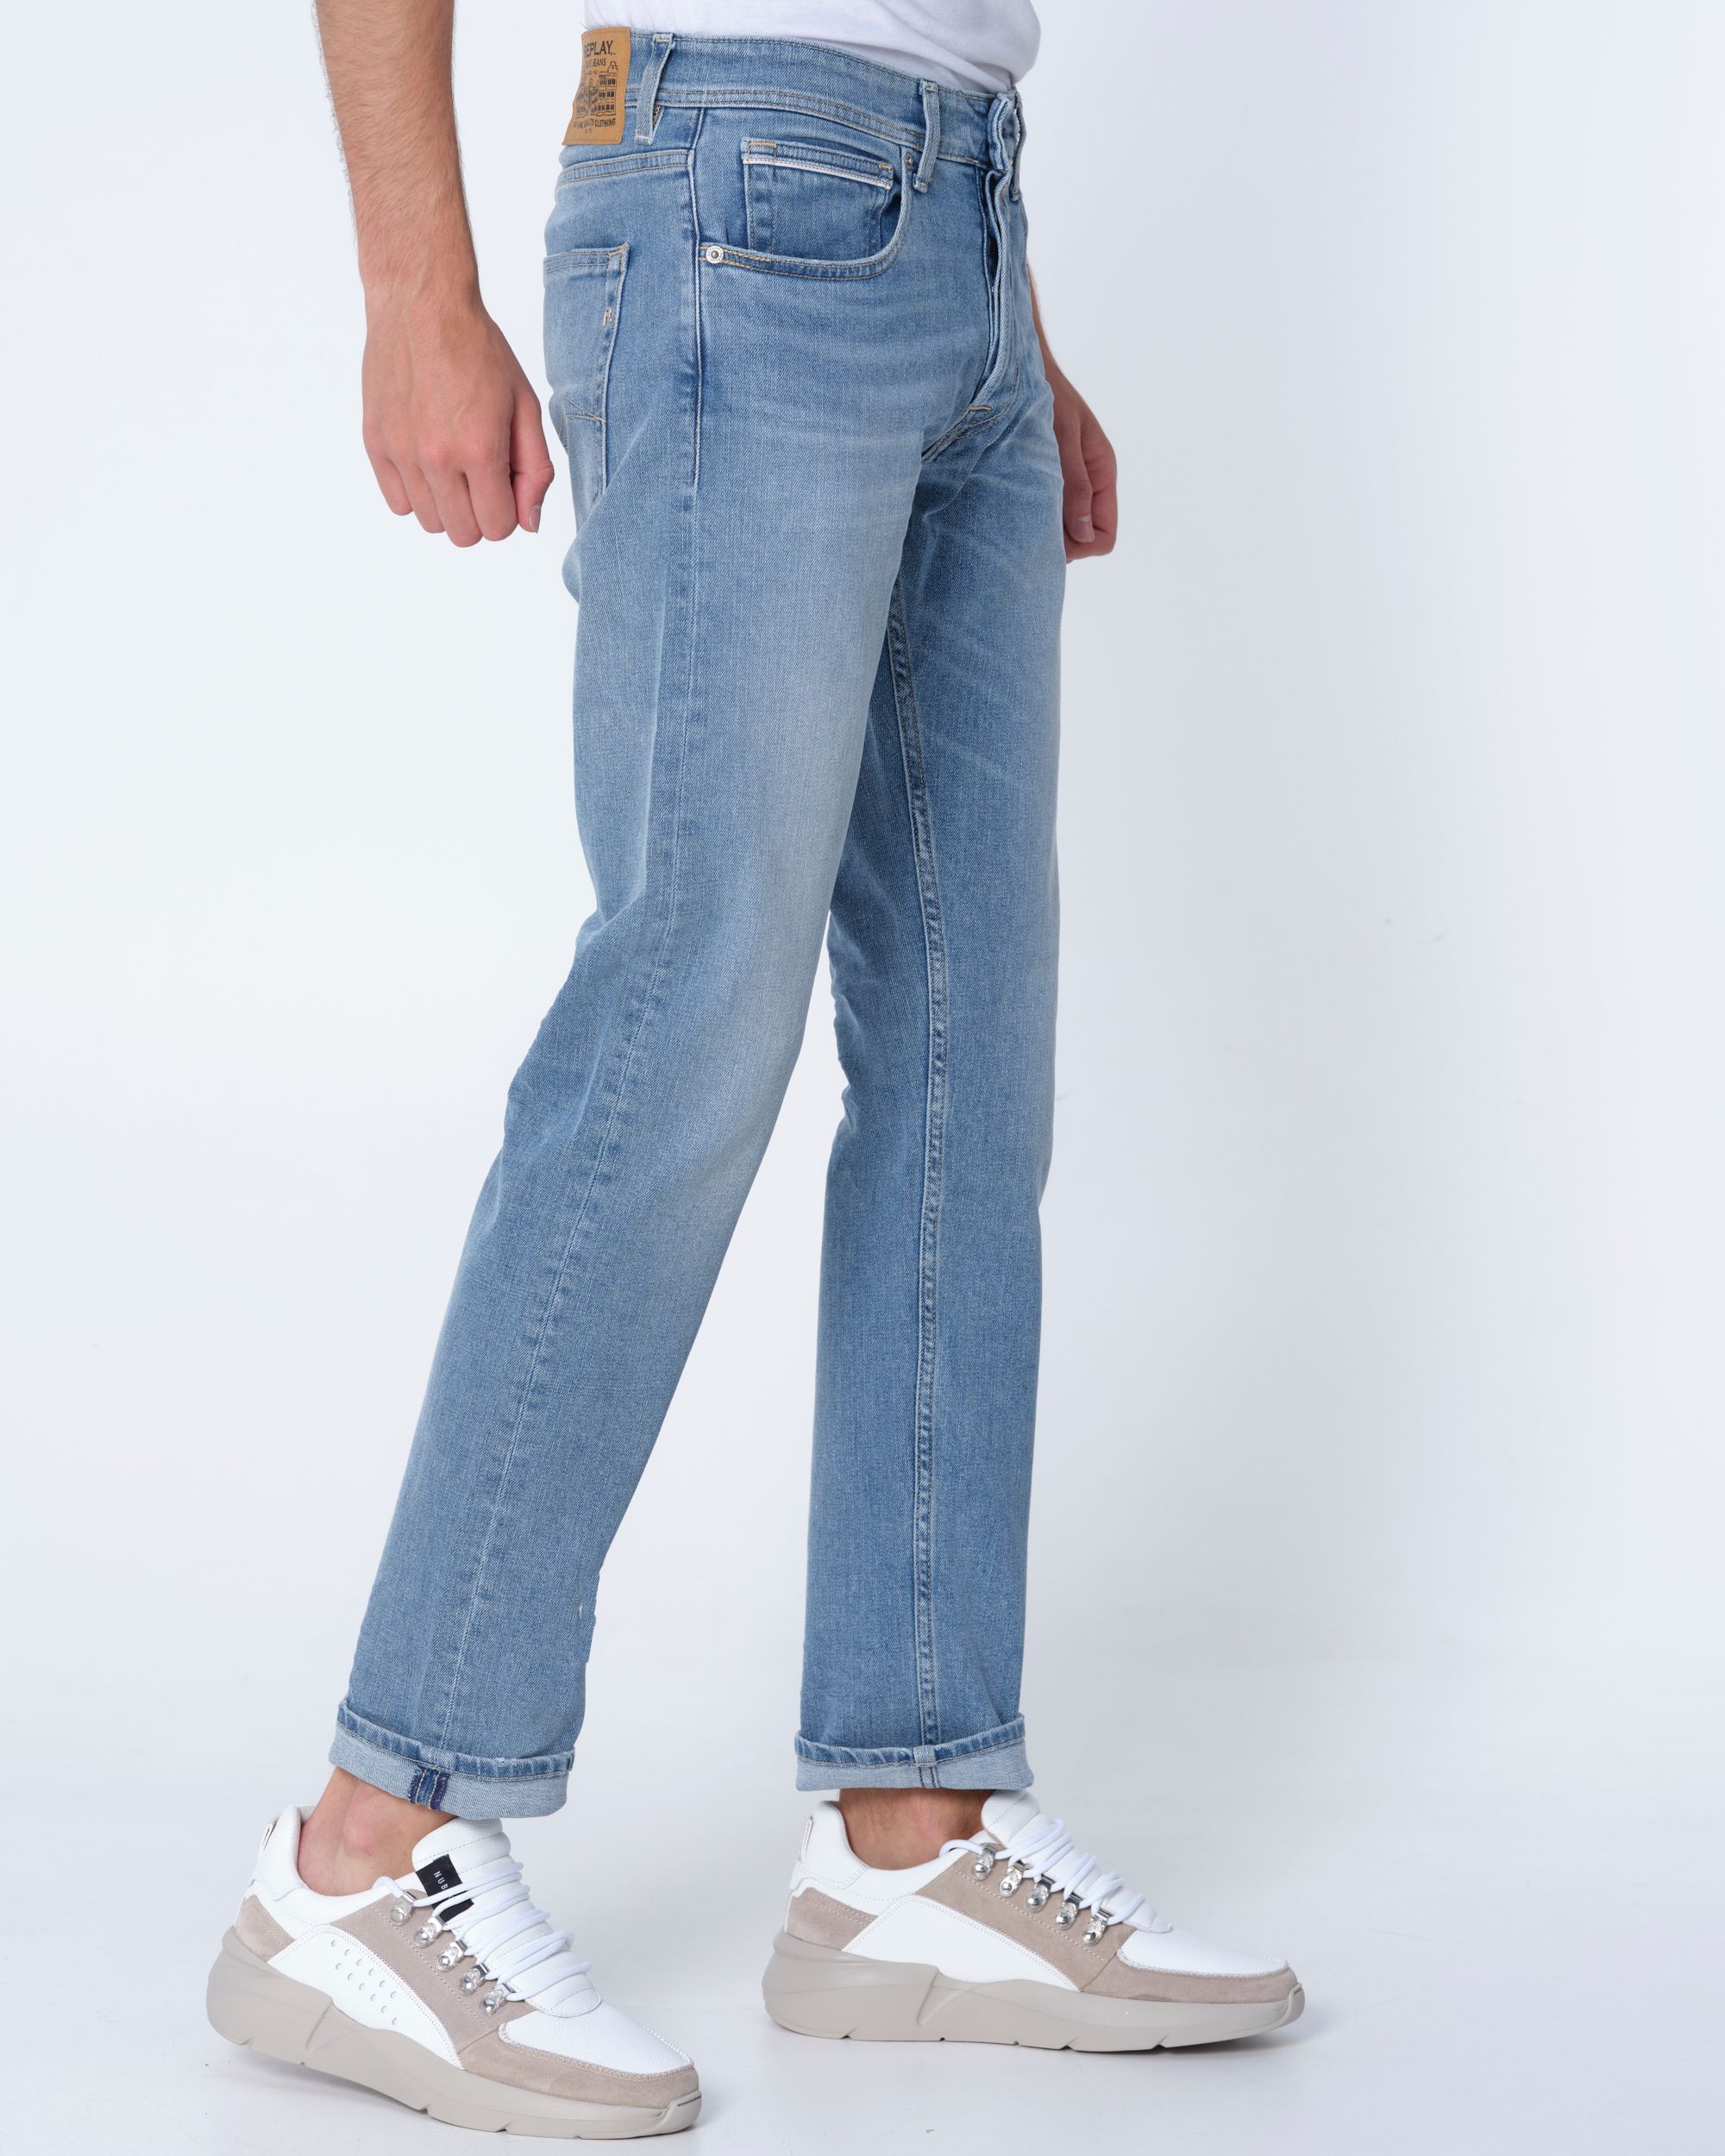 Replay Grover Jeans Blauw 081756-001-30/32